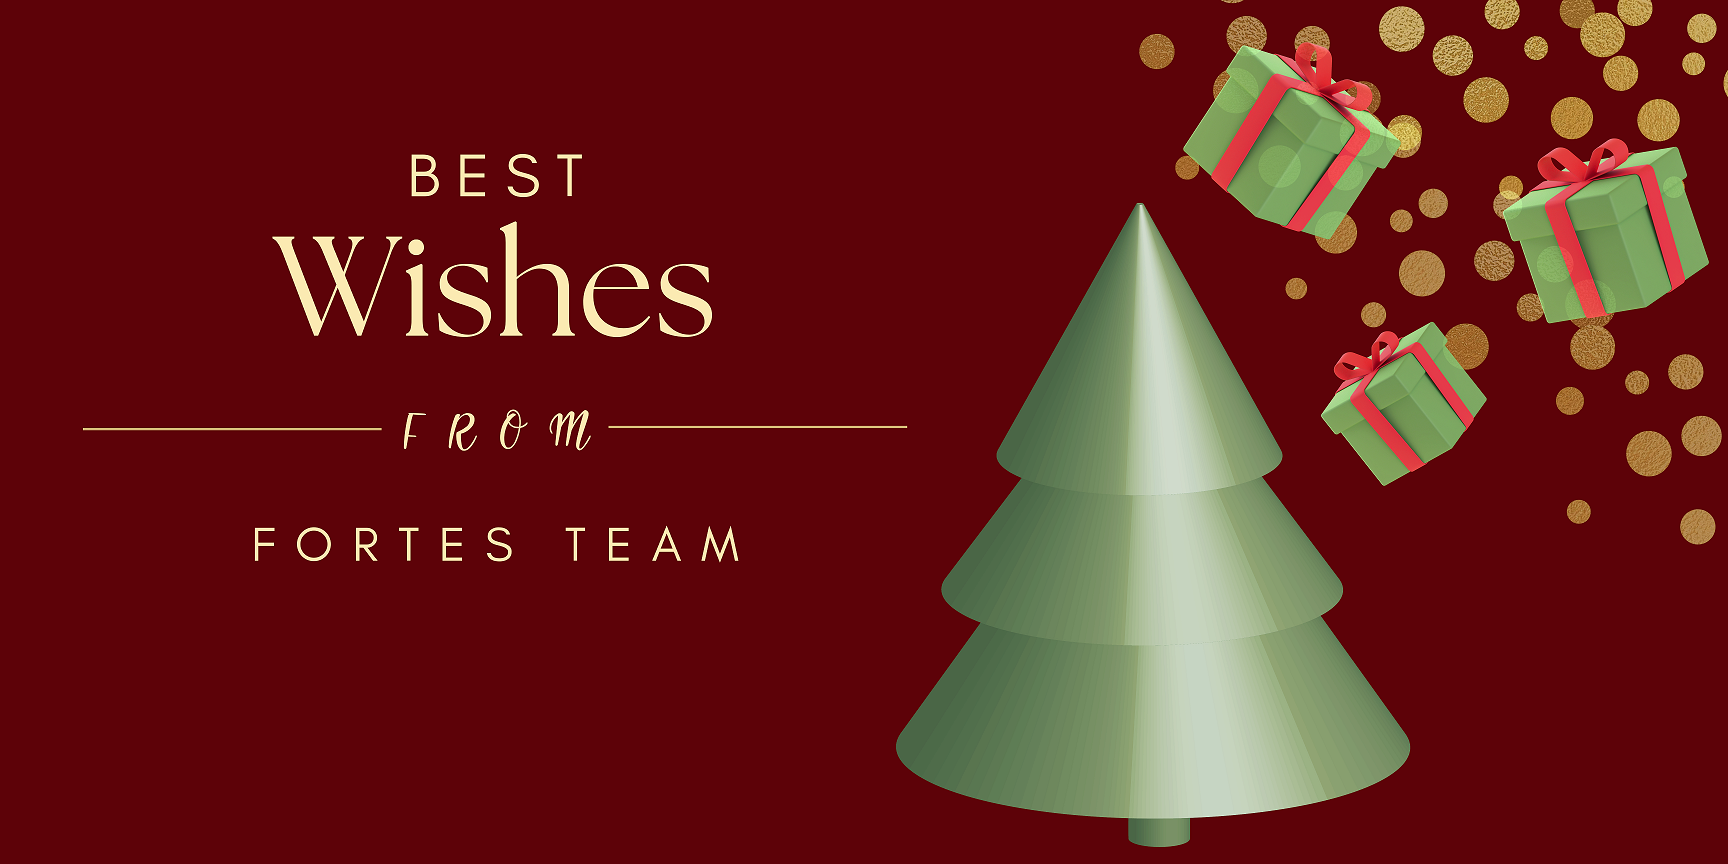 Best wishes from FORTES team